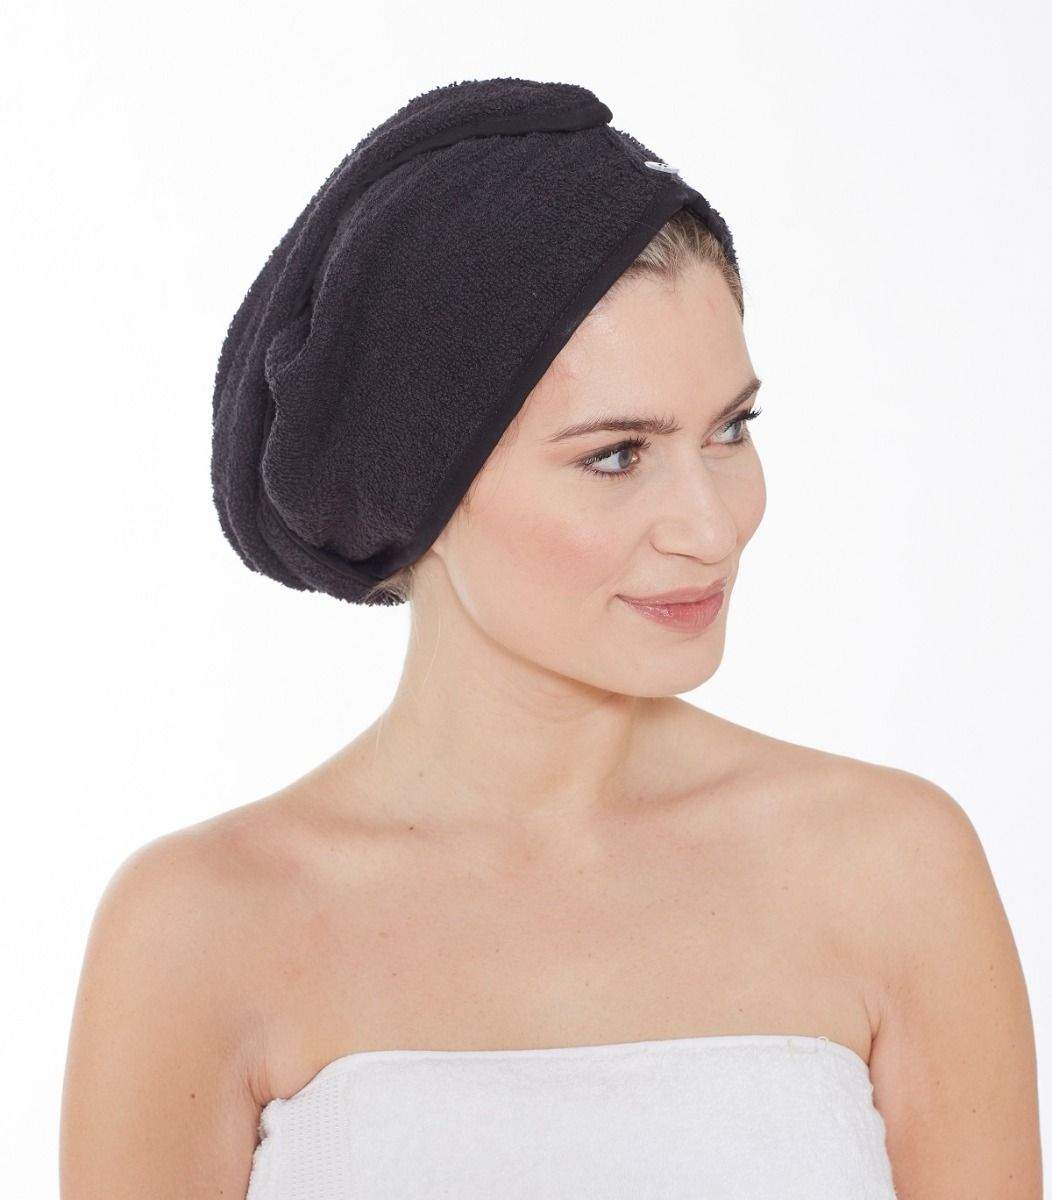 HIGH QUALITY 100% COMBED COTTON RYE COTTON HAIR TURBAN PAIR Bed and Bath Linen